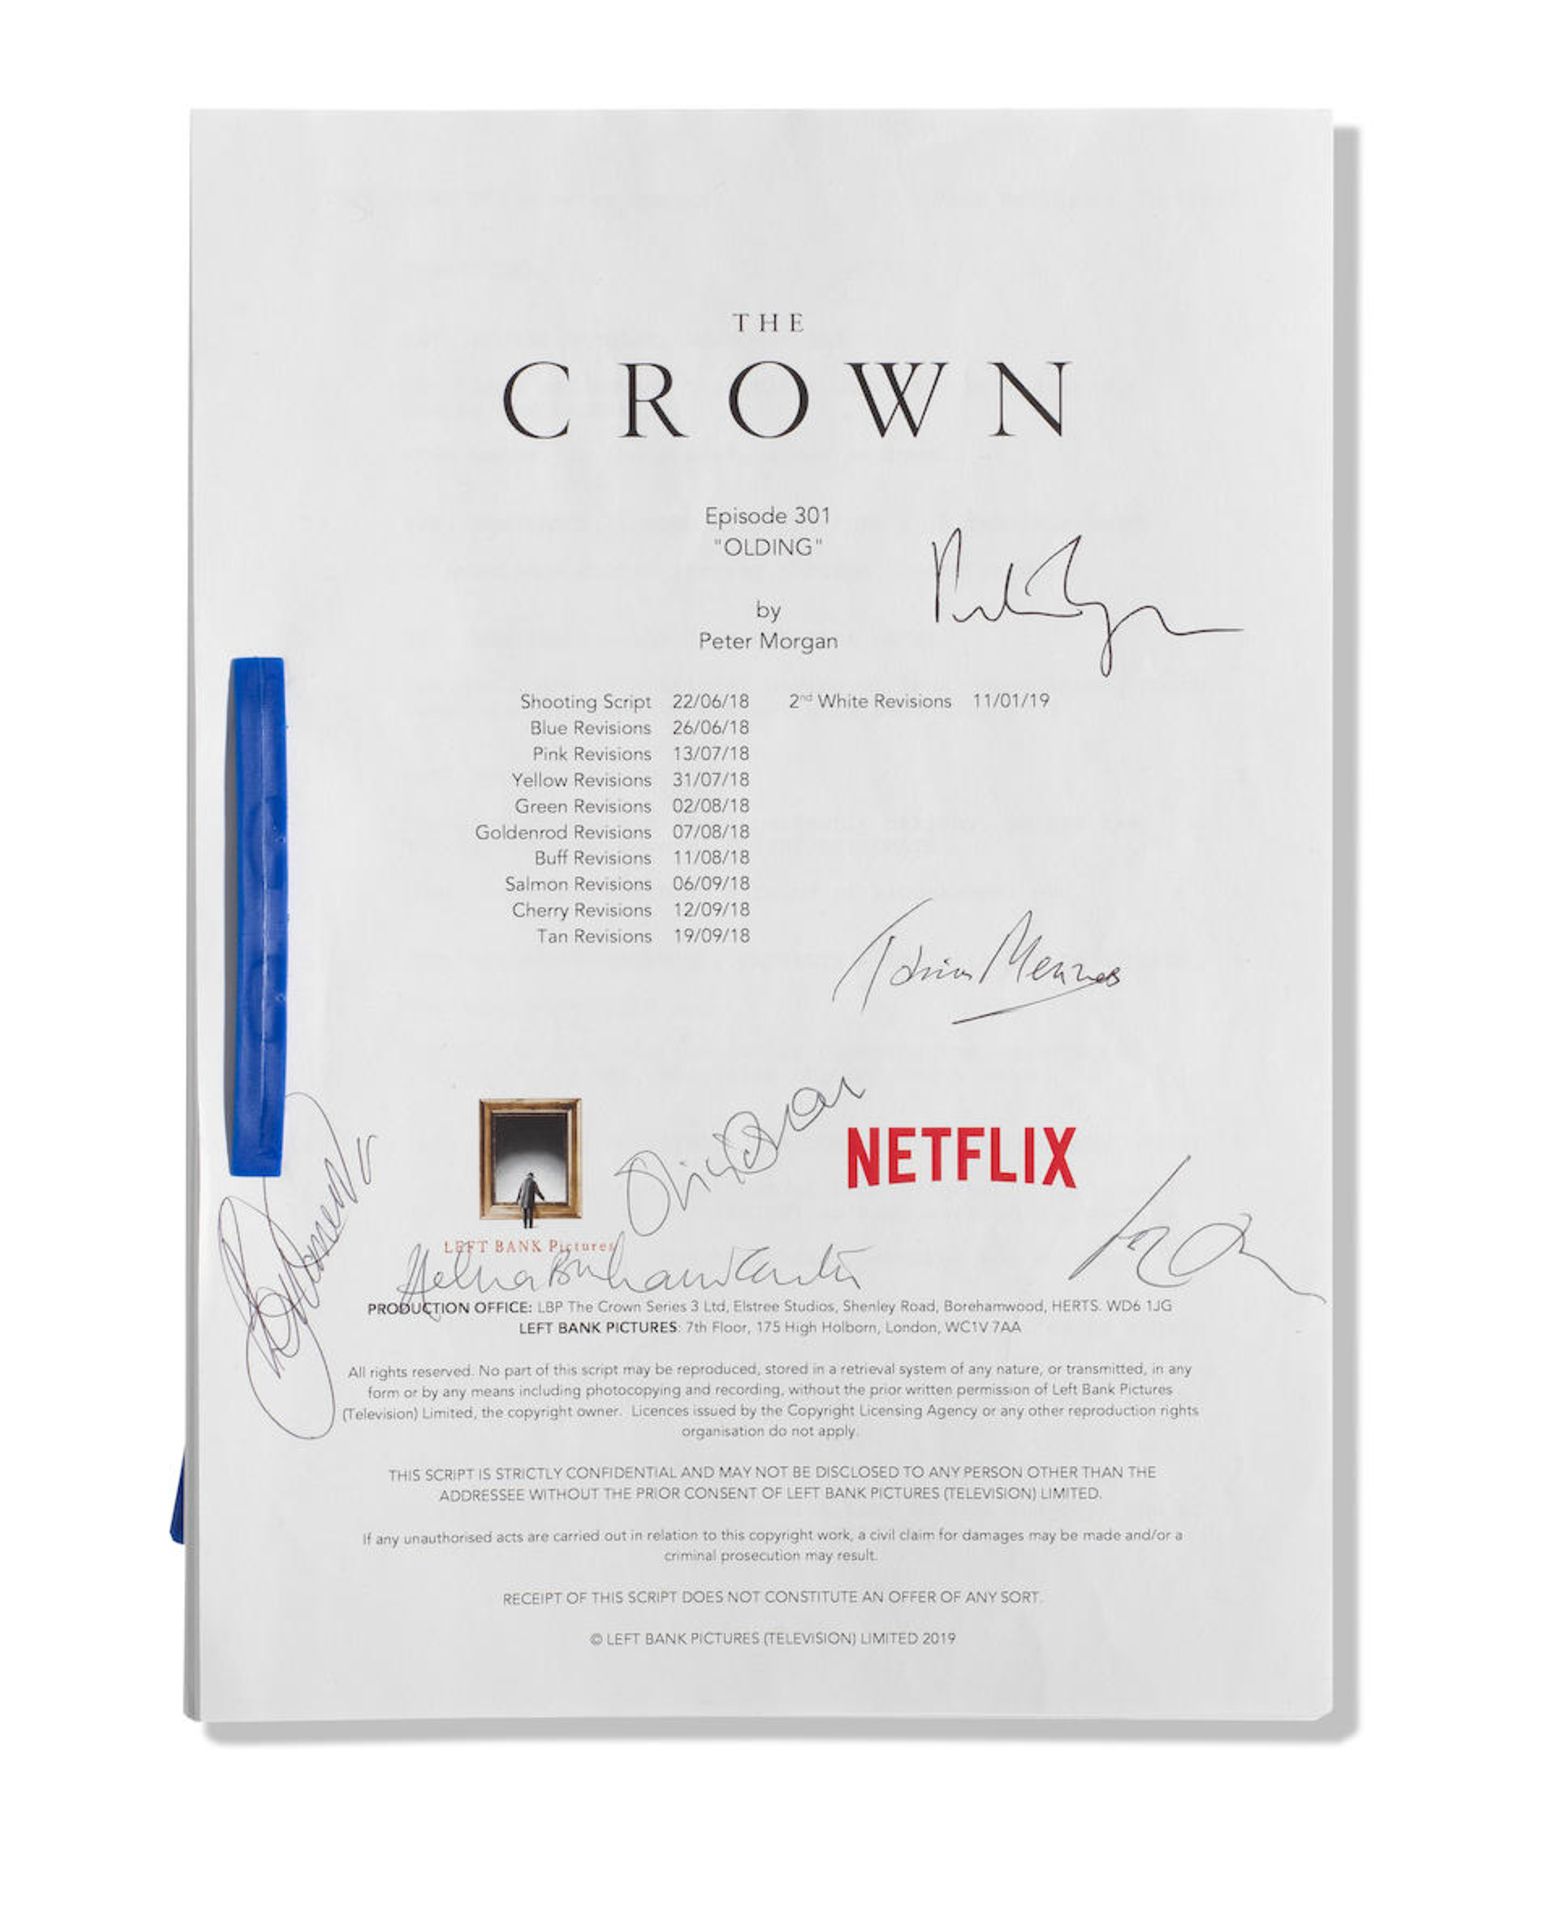 An autographed script for The Crown Season 3, Episode 1, 'Olding'